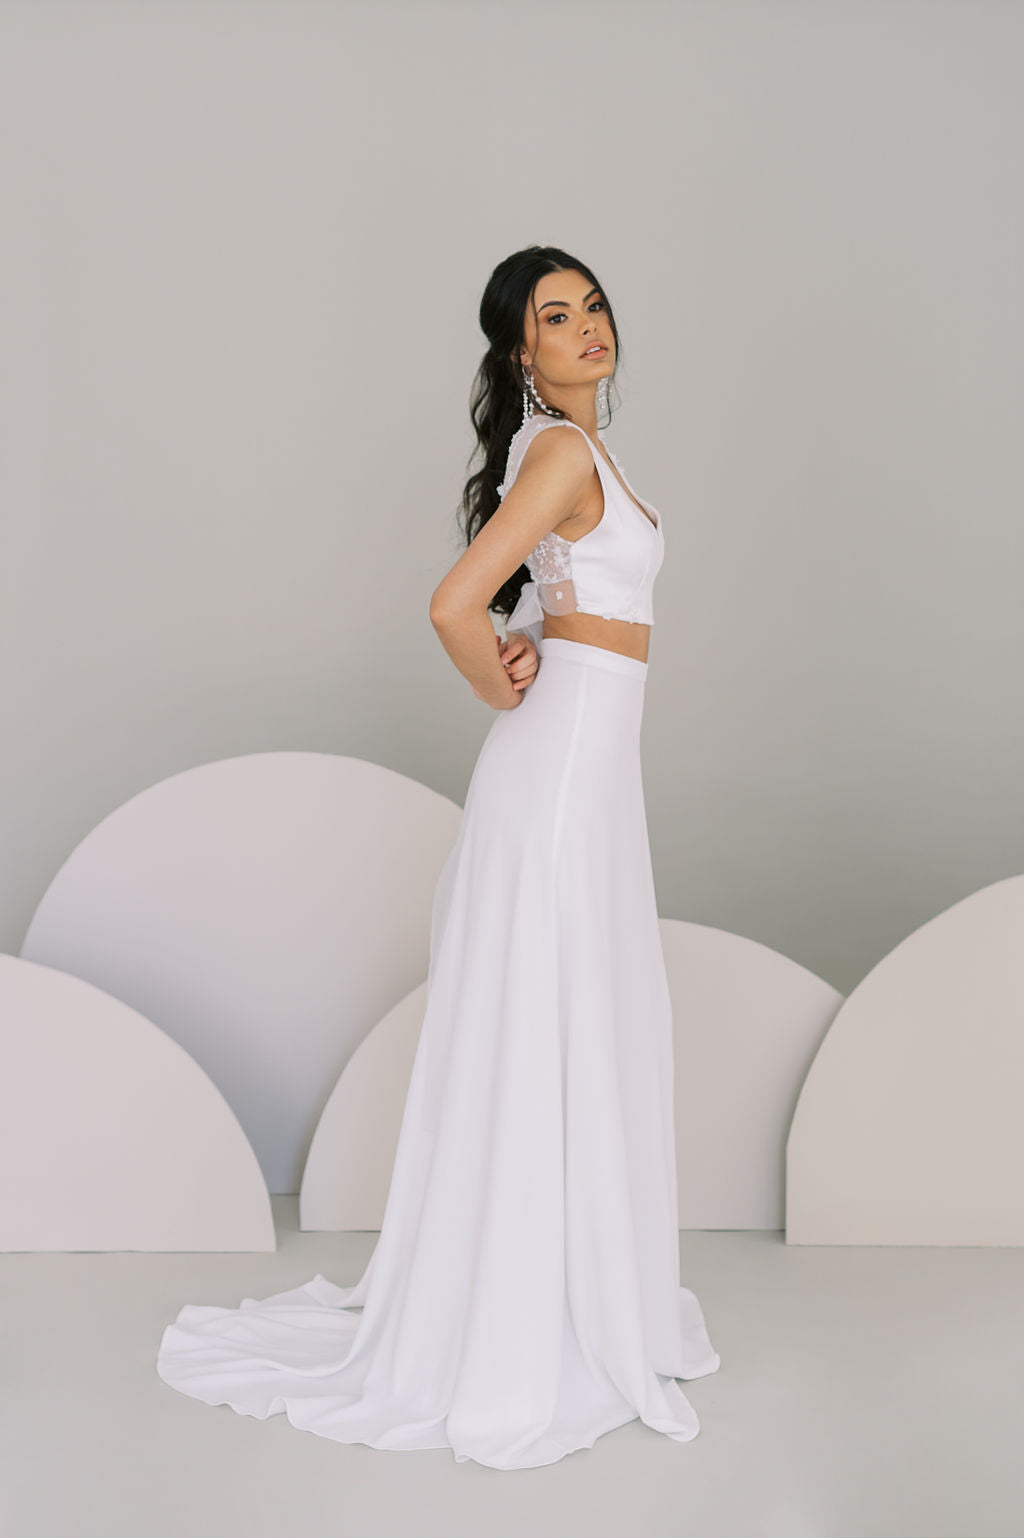 Chic whimsical bridal crop top worn with an A line skirt.. 3D lace at back, crepe front. Self tied tulle bow at the back. By Catherine Langlois, Toronto, Canada.